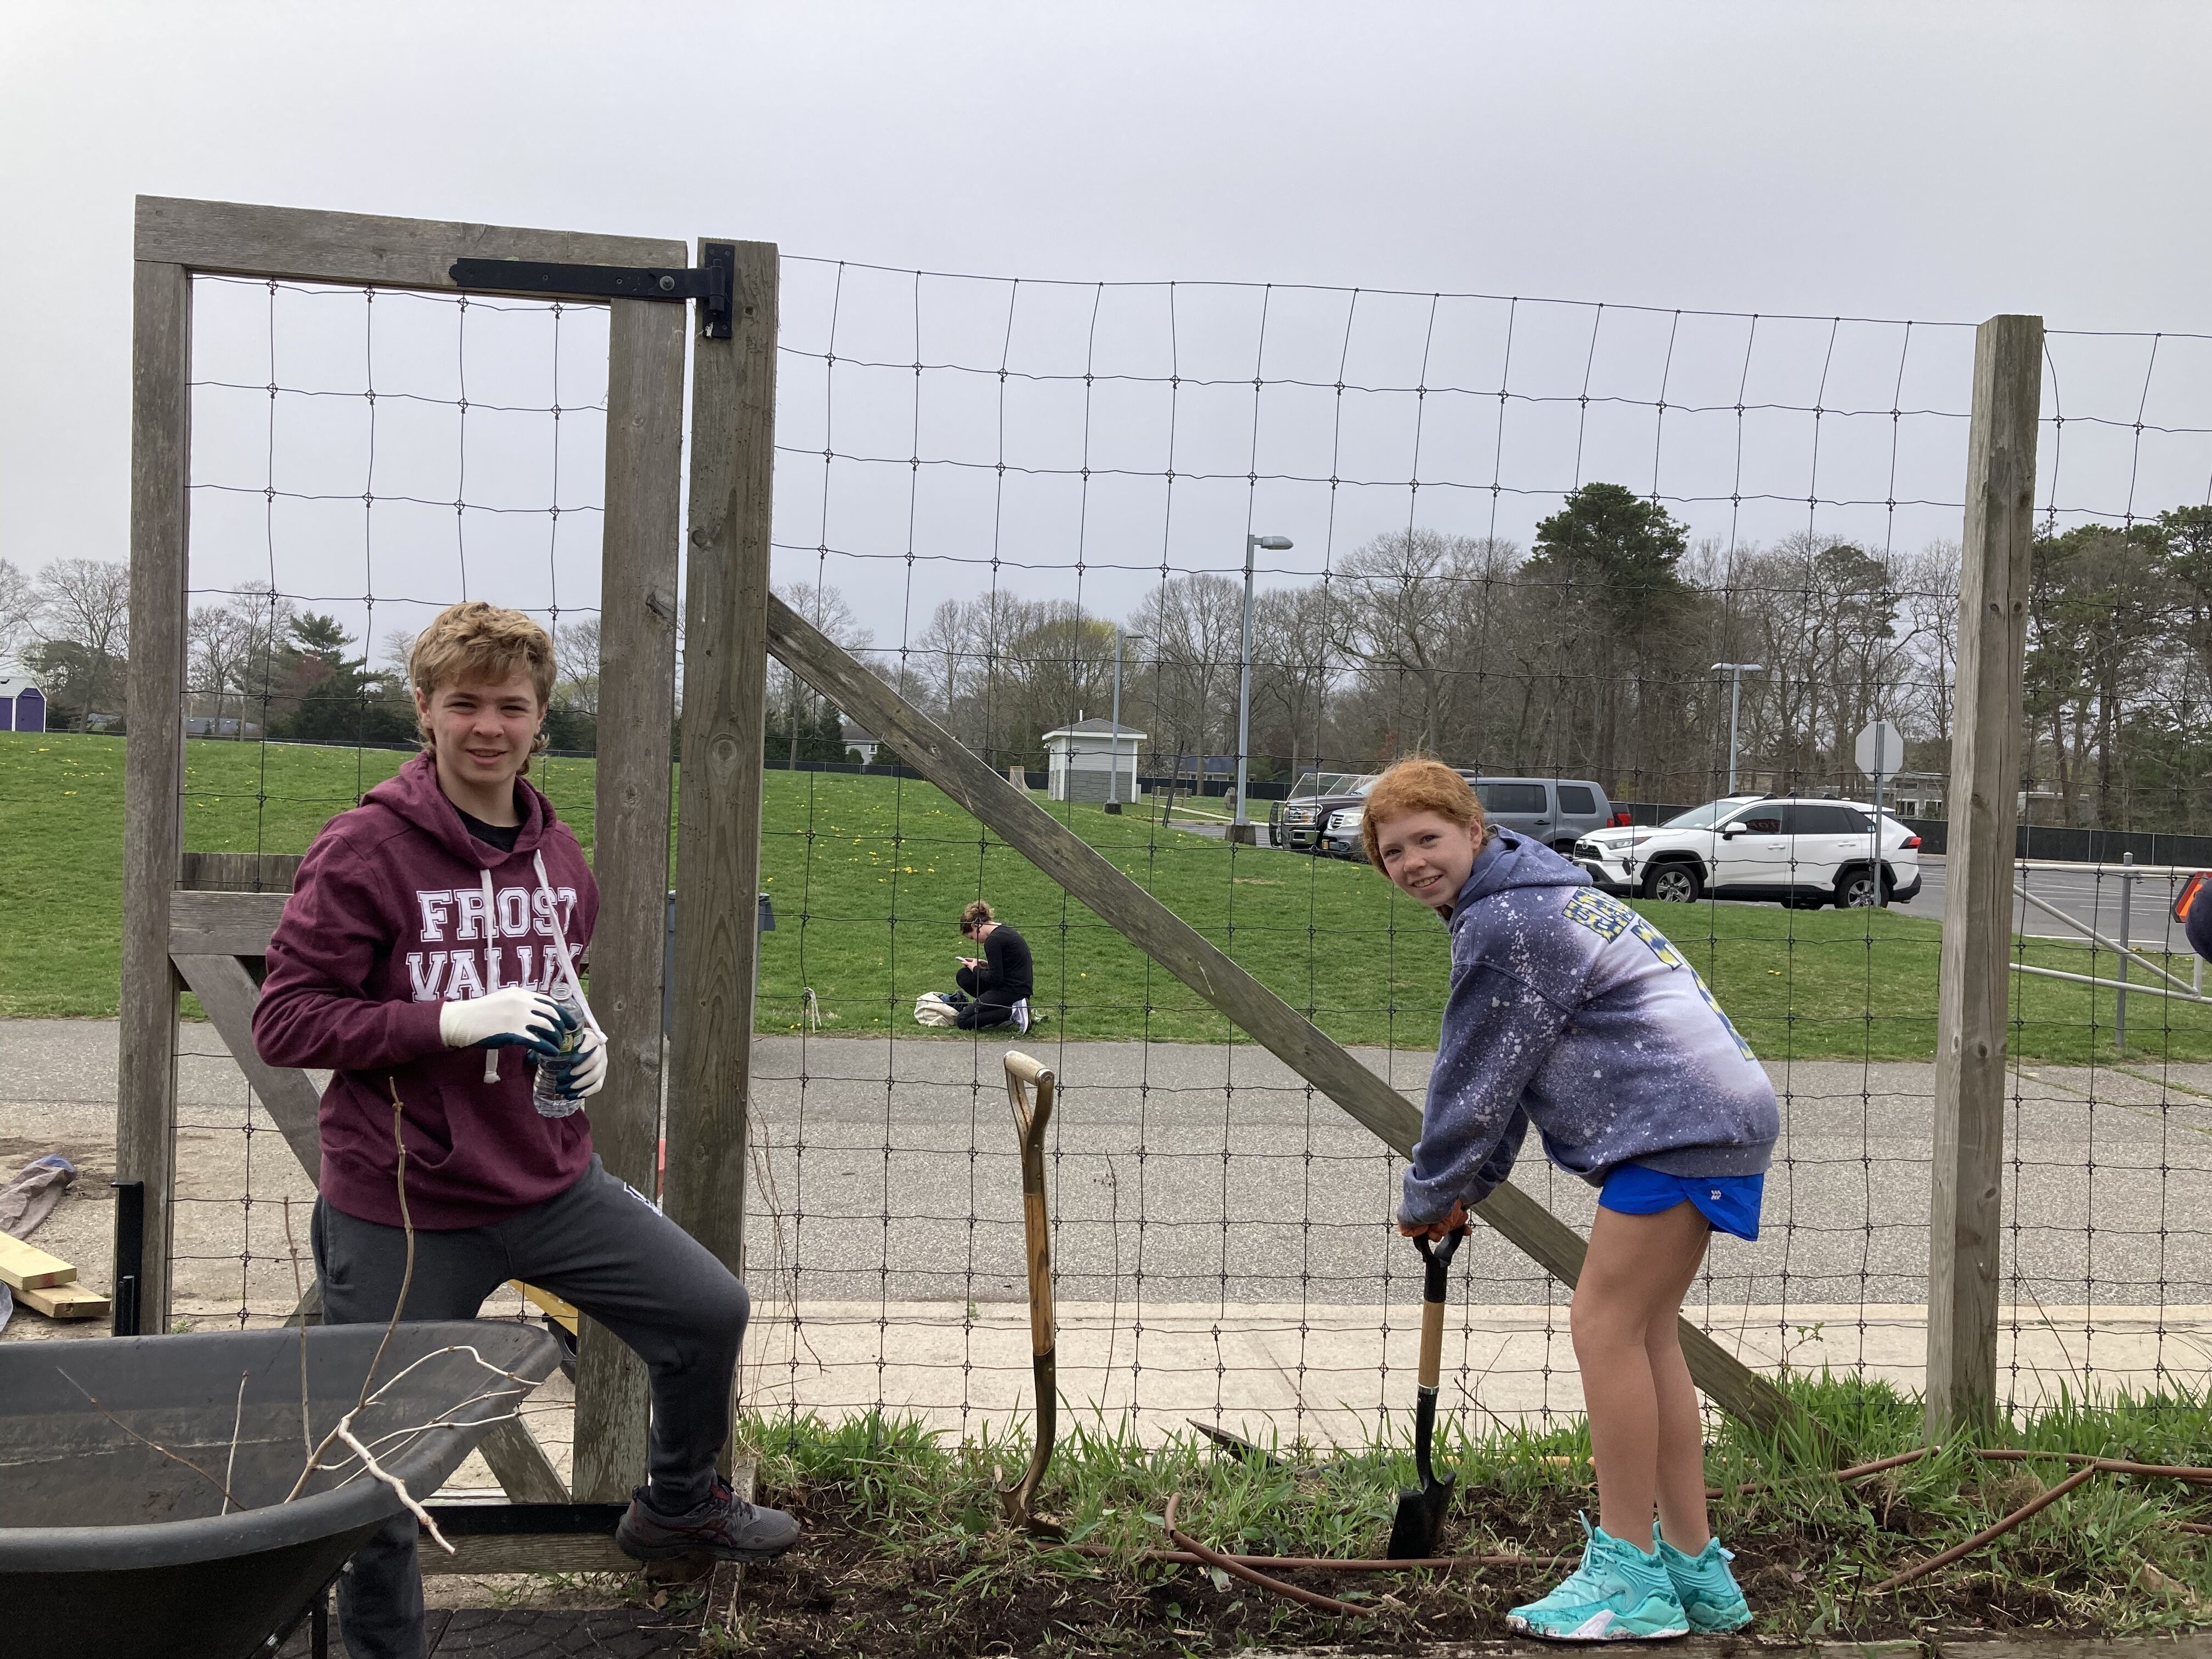 Hampton Bays Middle School students, Garden Club members, along with community volunteers,  cleaned and weeded the perimeter of the community-school garden. Participants also assisted in filling garden beds with new topsoil to prepare them for spring planting. Students will soon be planting an herb garden that will be shared with community garden members. COURTESY HAMPTON BAYS SCHOOL DISTRICT